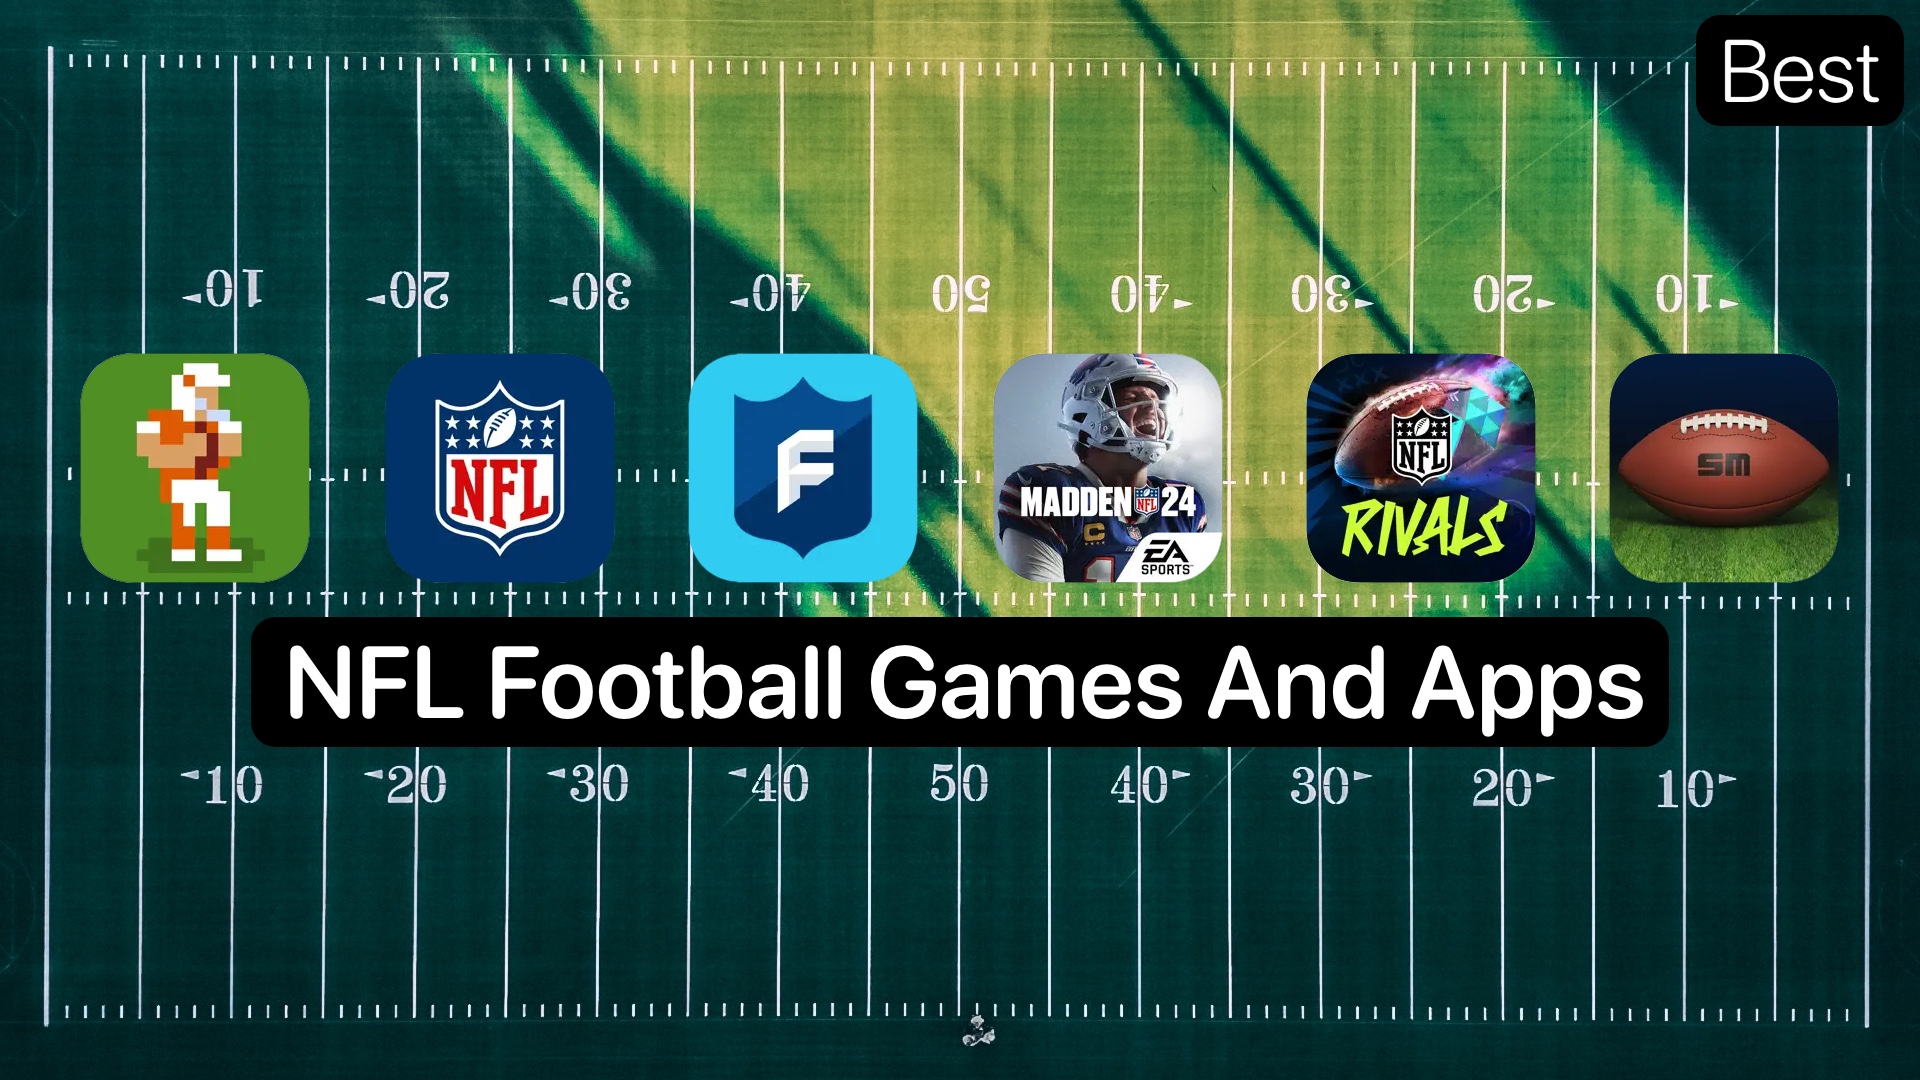 Best NFL Football Apps And Games For iPhone - iOS Hacker